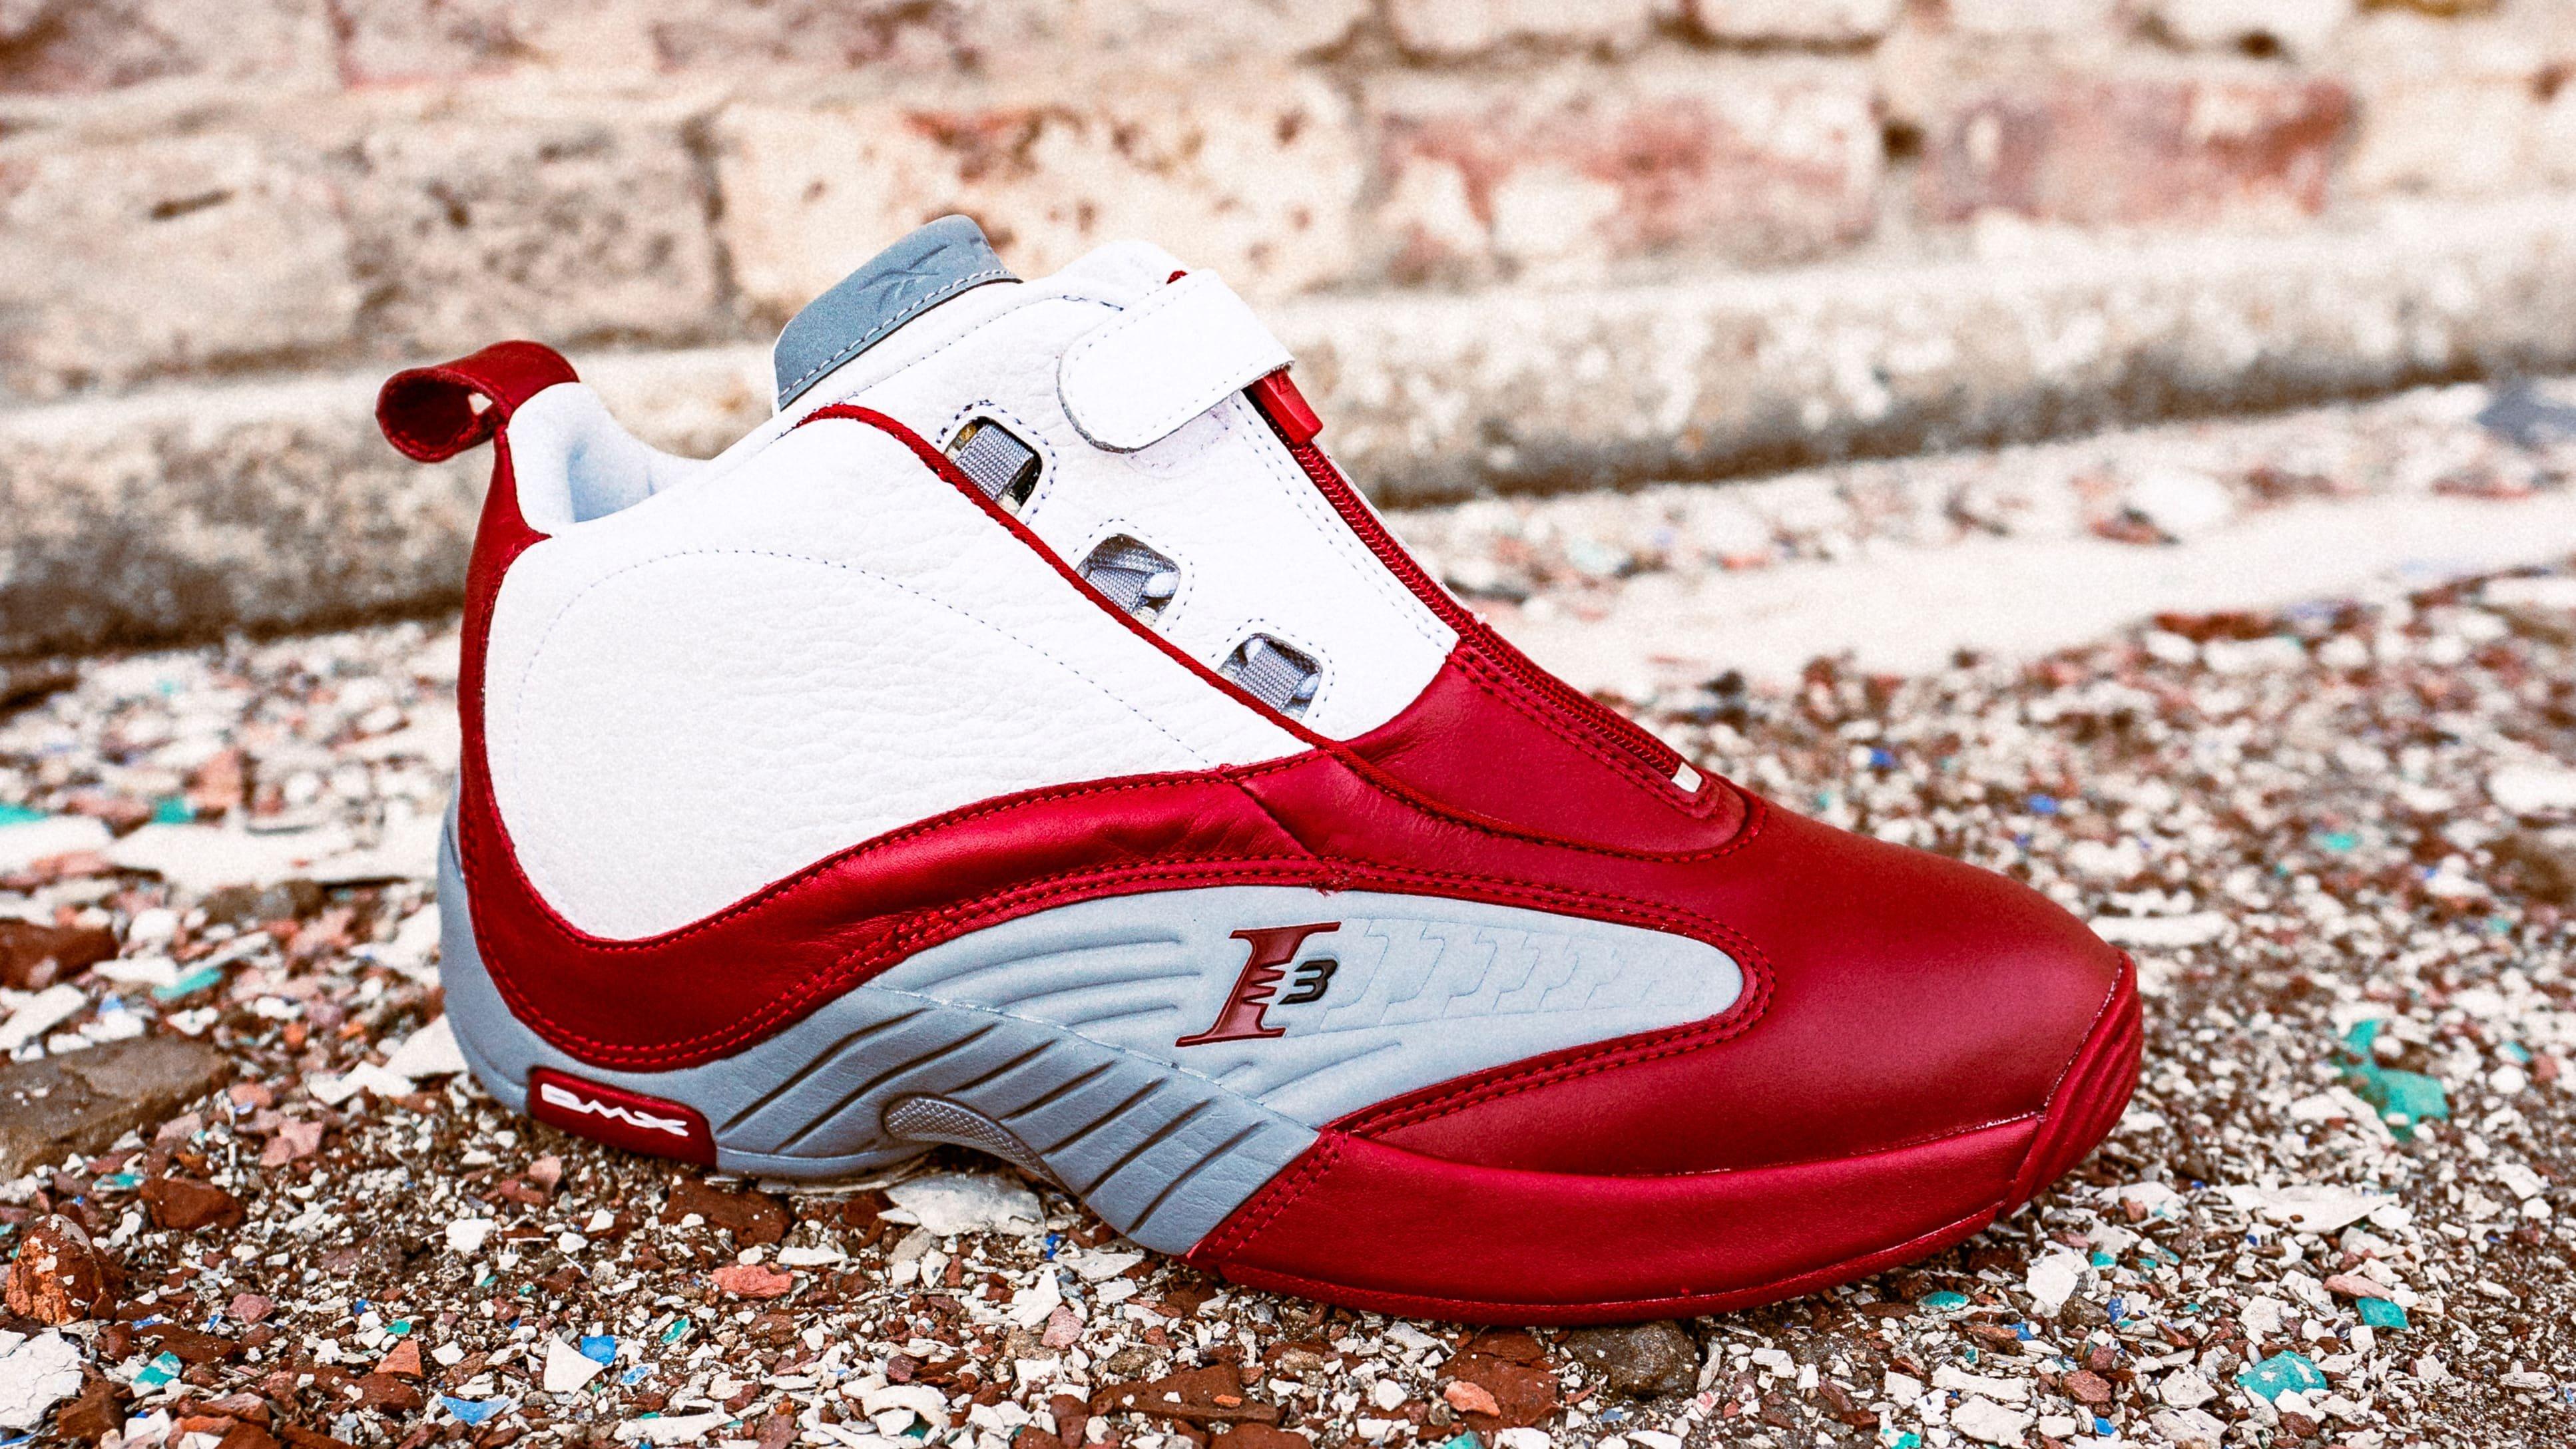 Rejse areal Match Sneakers Release – Reebok Answer IV “Flash Red/White/Solid Grey” Men's  Shoe, Out 4/15